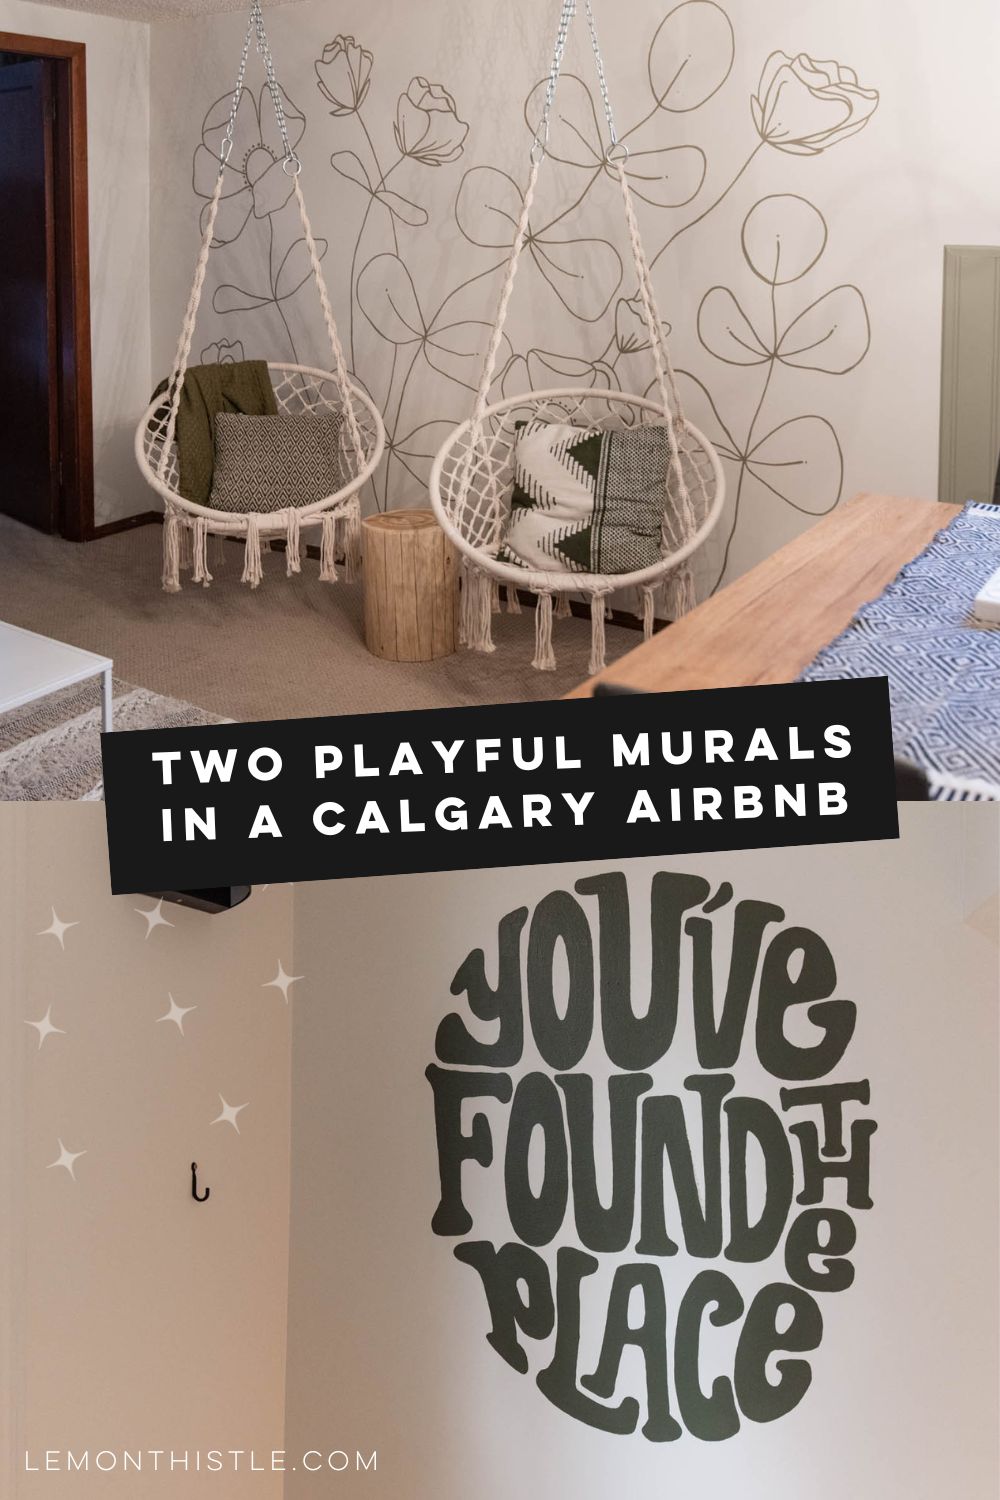 collage of two murals- one line art floral with macrame chairs hanign and one funky 'you've found the place' hand lettered mural in entry. Text over reads: Two playful murals in a calgary airbnb